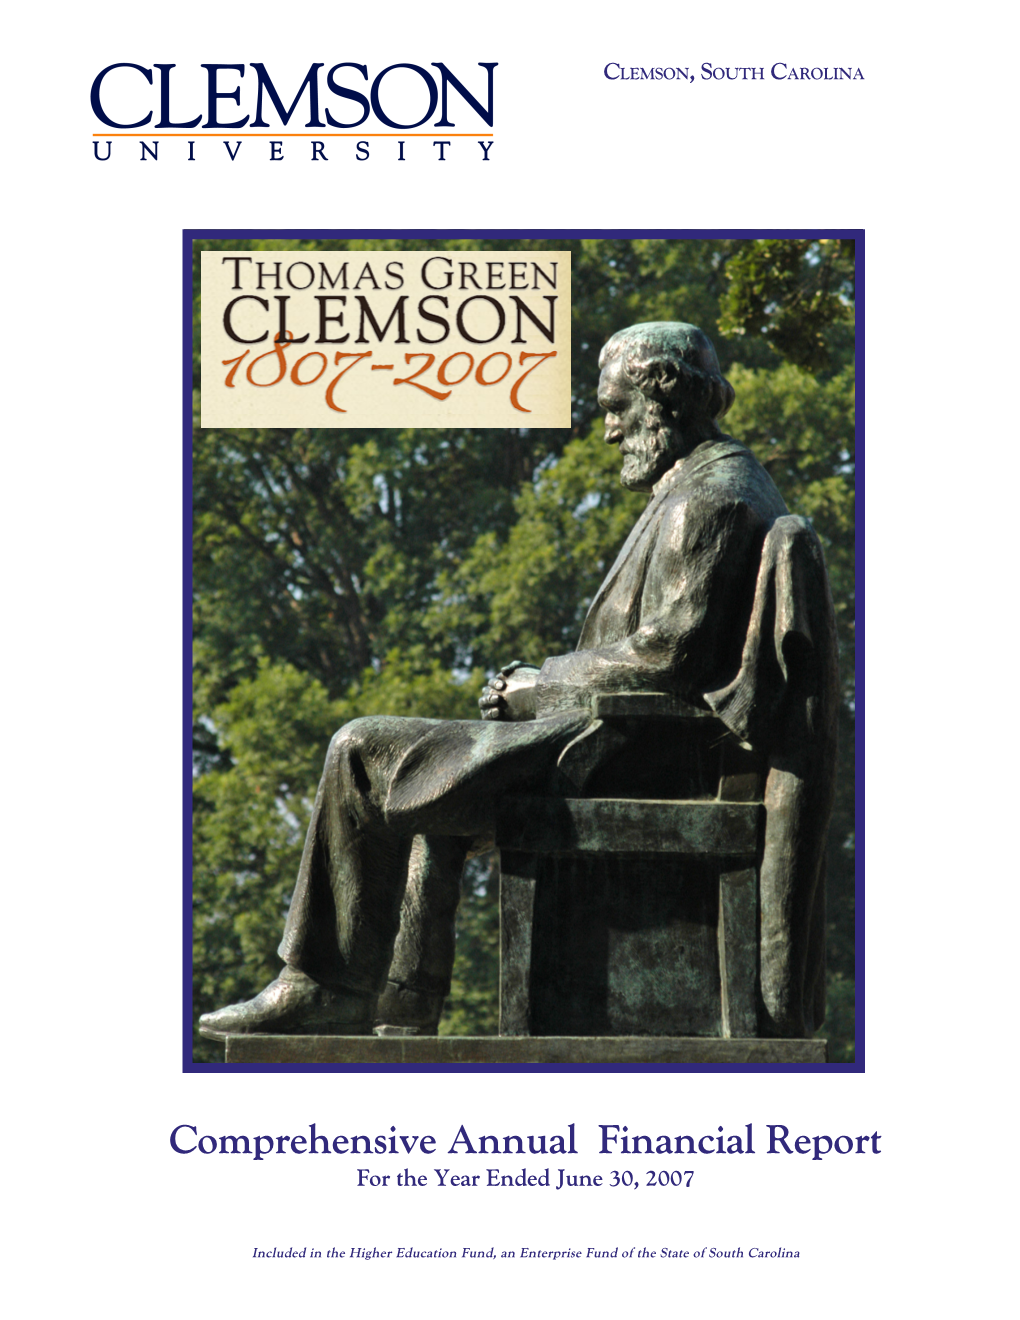 Comprehensive Annual Financial Report for the Year Ended June 30, 2007